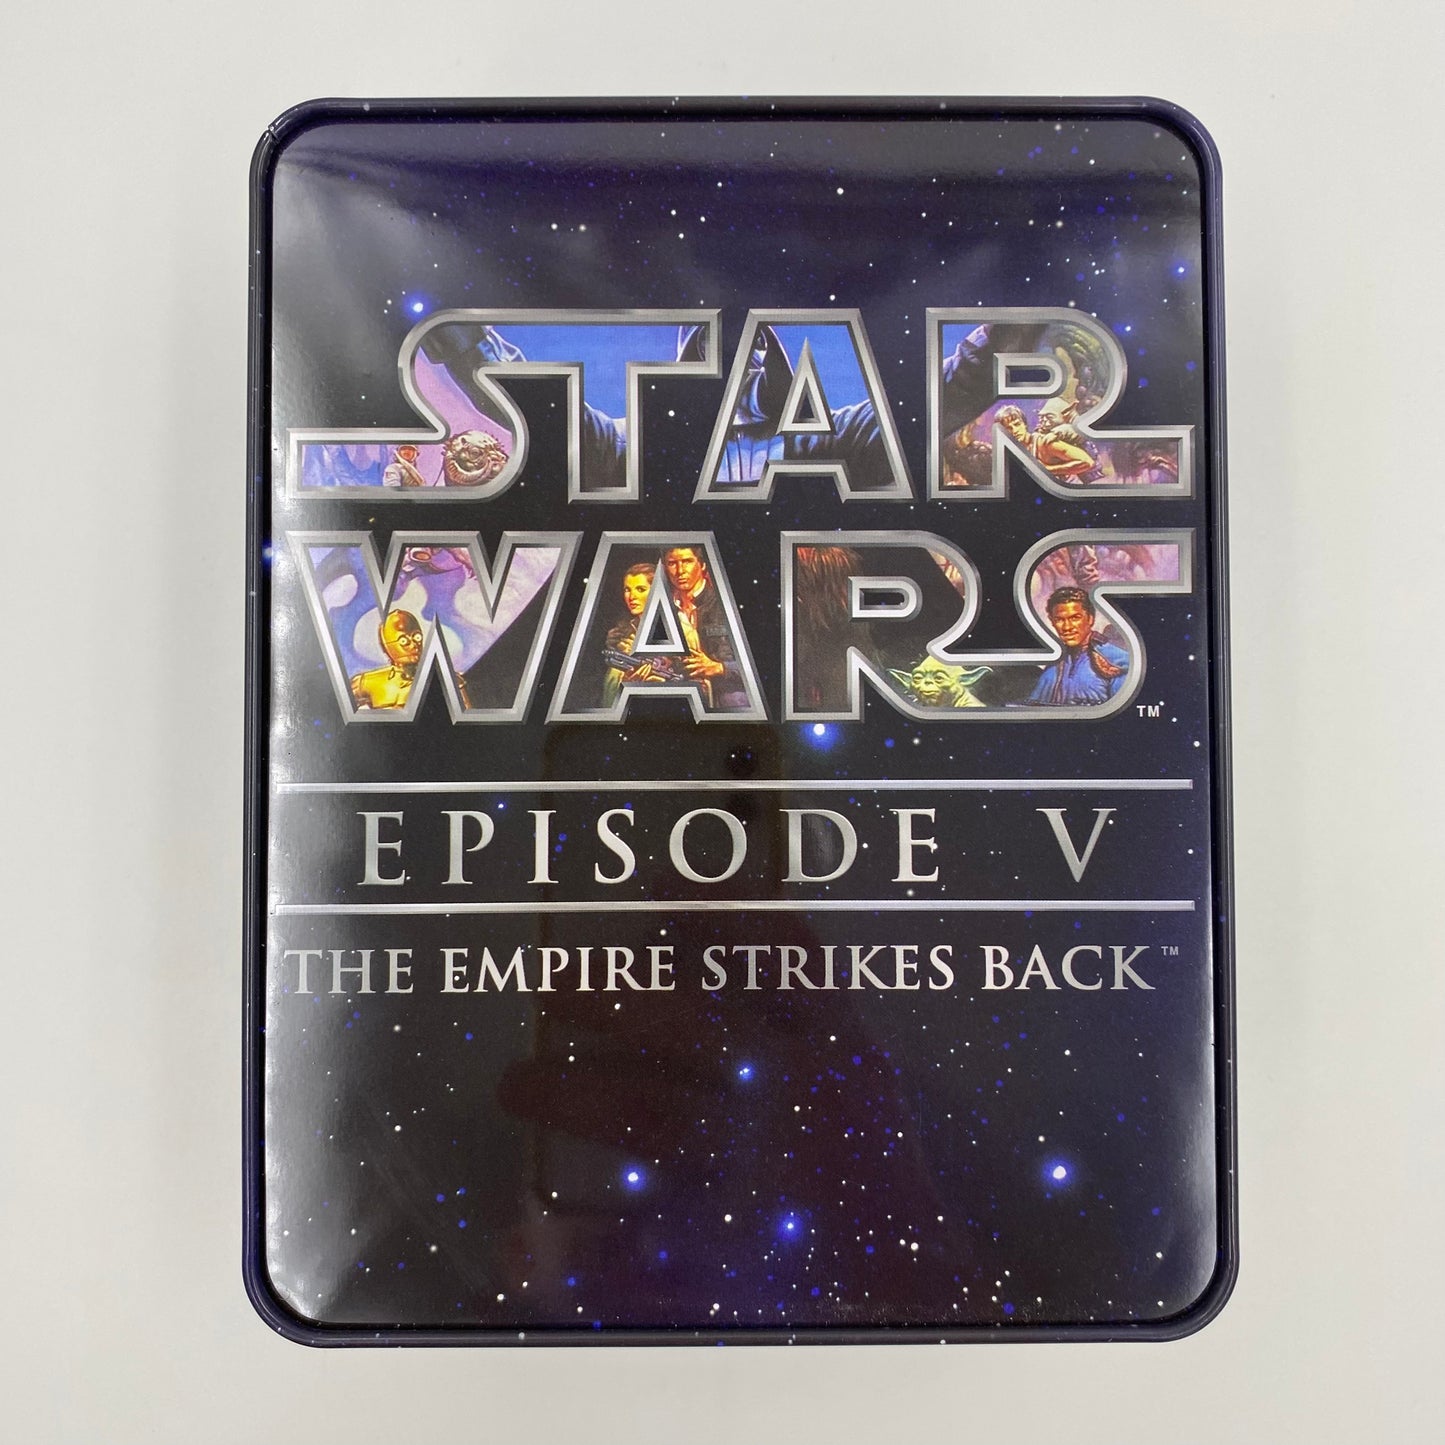 Star Wars The Empire Strikes Back Episode V Commemorative Tin Collection carded 3.75” carded action figures in tin box (2006) Hasbro